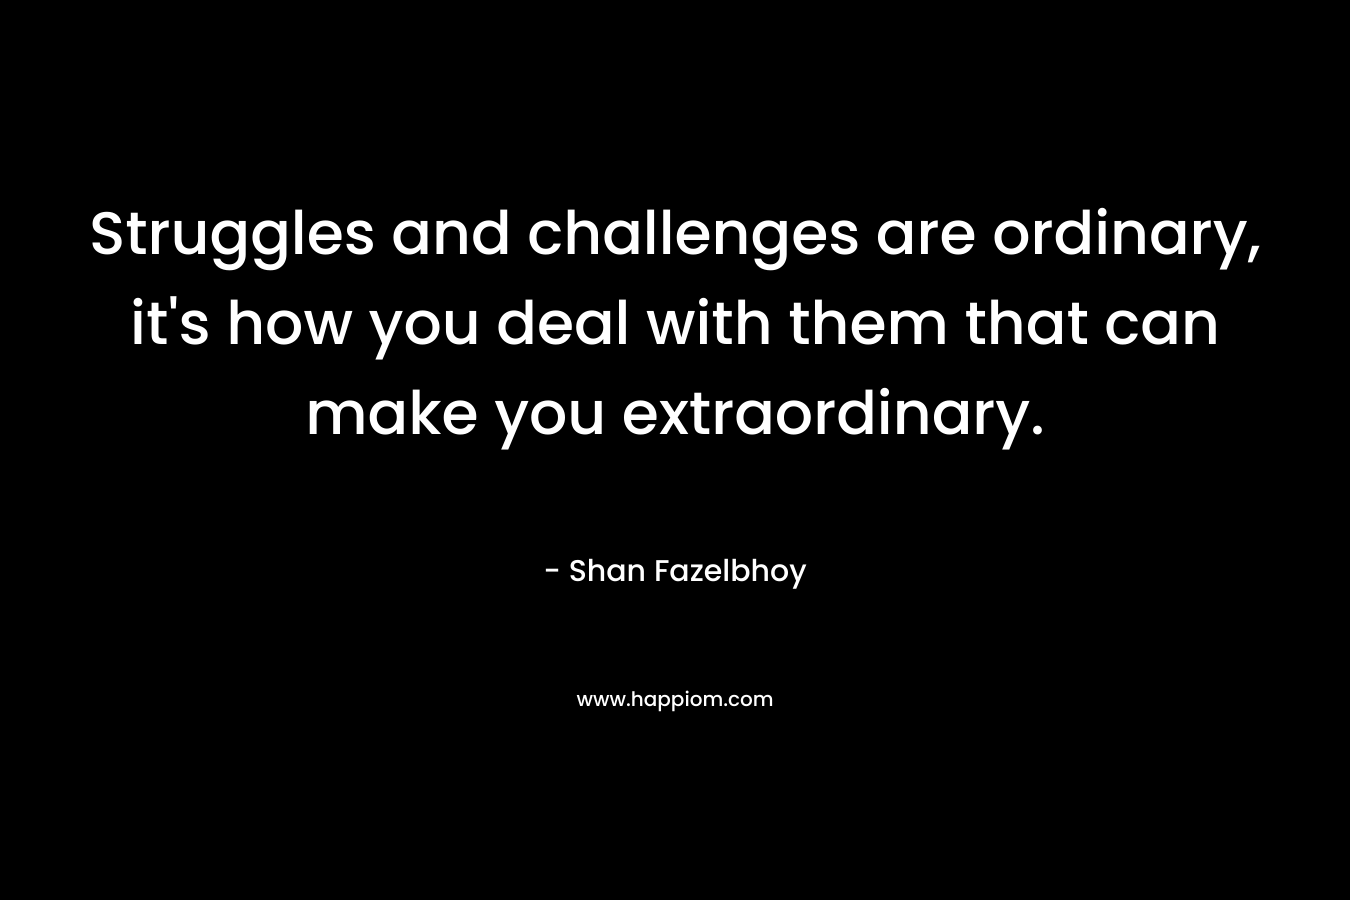 Struggles and challenges are ordinary, it's how you deal with them that can make you extraordinary.